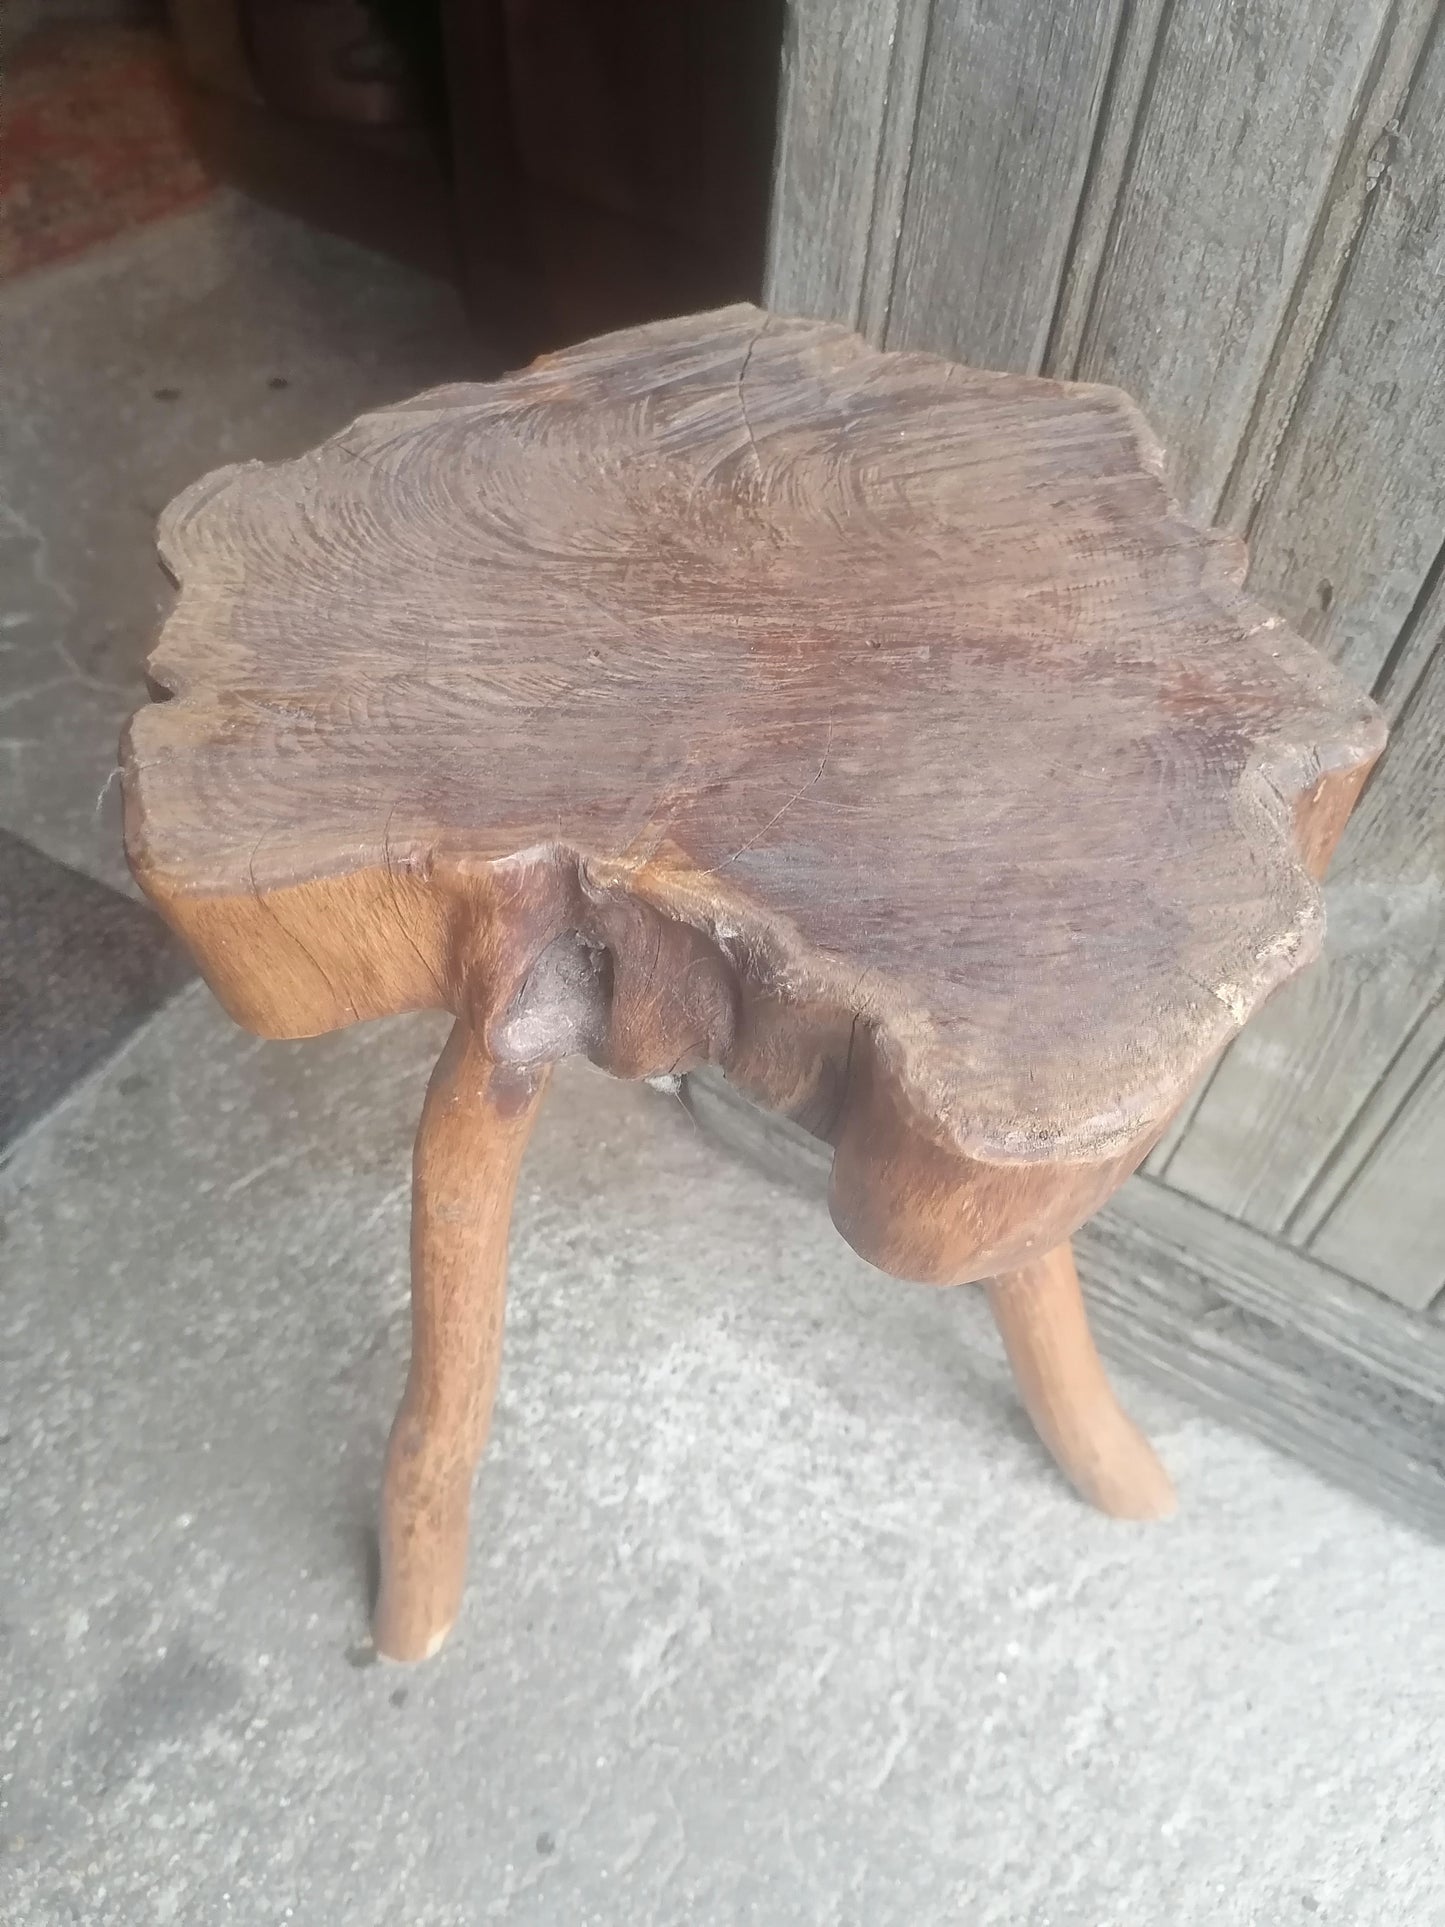 French Wooden Stool 3 leg Rustic LogFrench Wooden Stool 3 leg Rustic Log